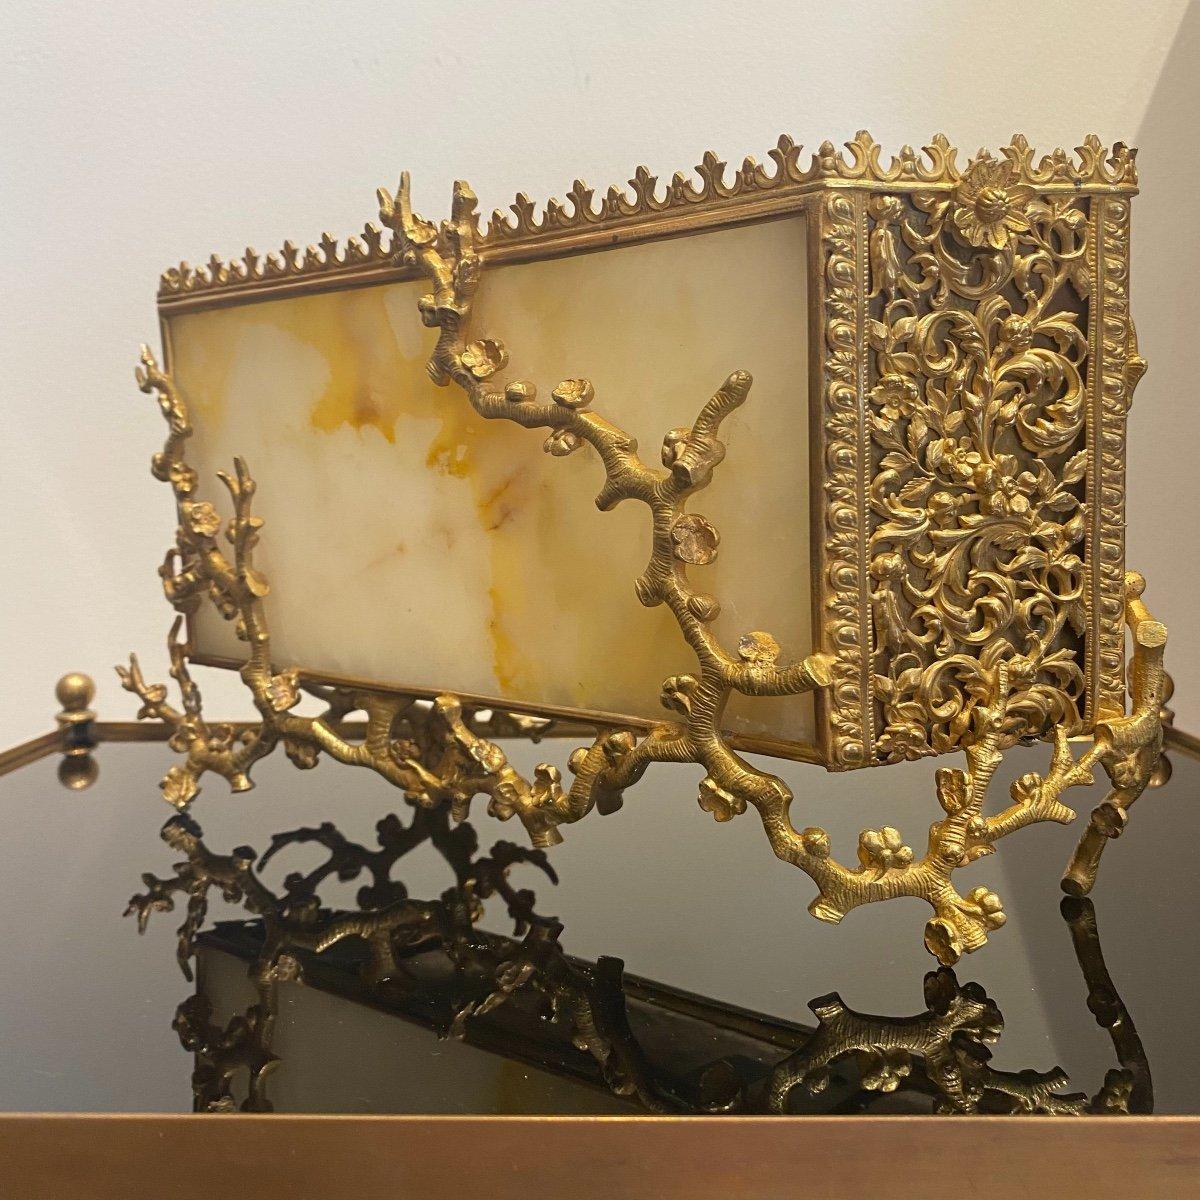 Gilded bronze and alabaster letter carrier in the Japanese style.
The bronze tree branch decorations are very delicate. The alabaster plates on the two main sides give a very luminous look to this rare object.
The sides are decorated with openwork